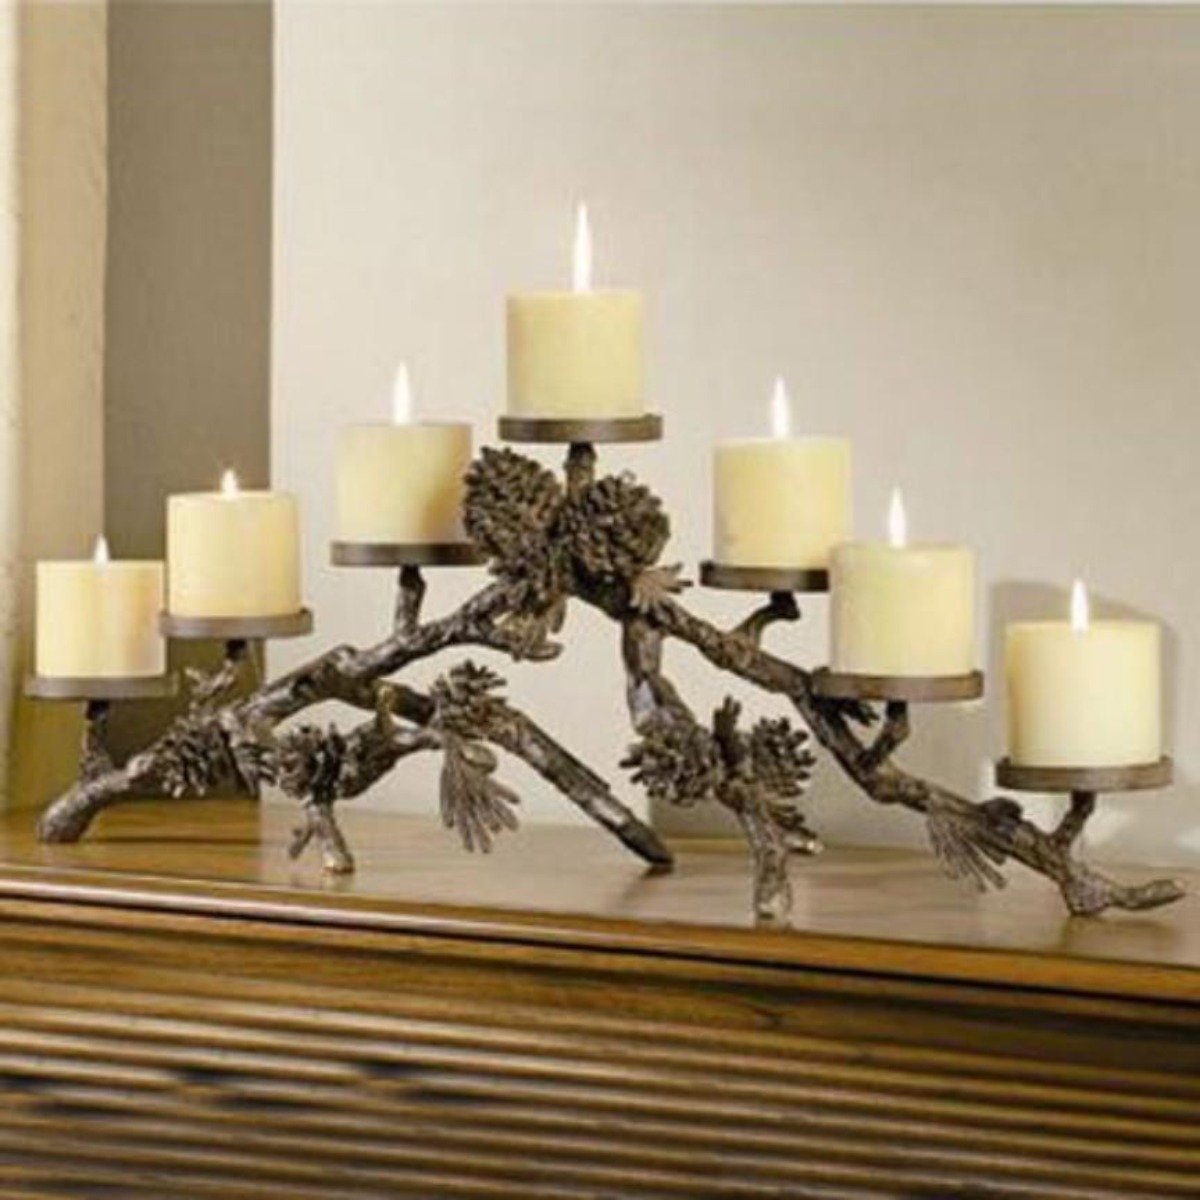 Pinecone Mantel Candle Holder - Iron Accents